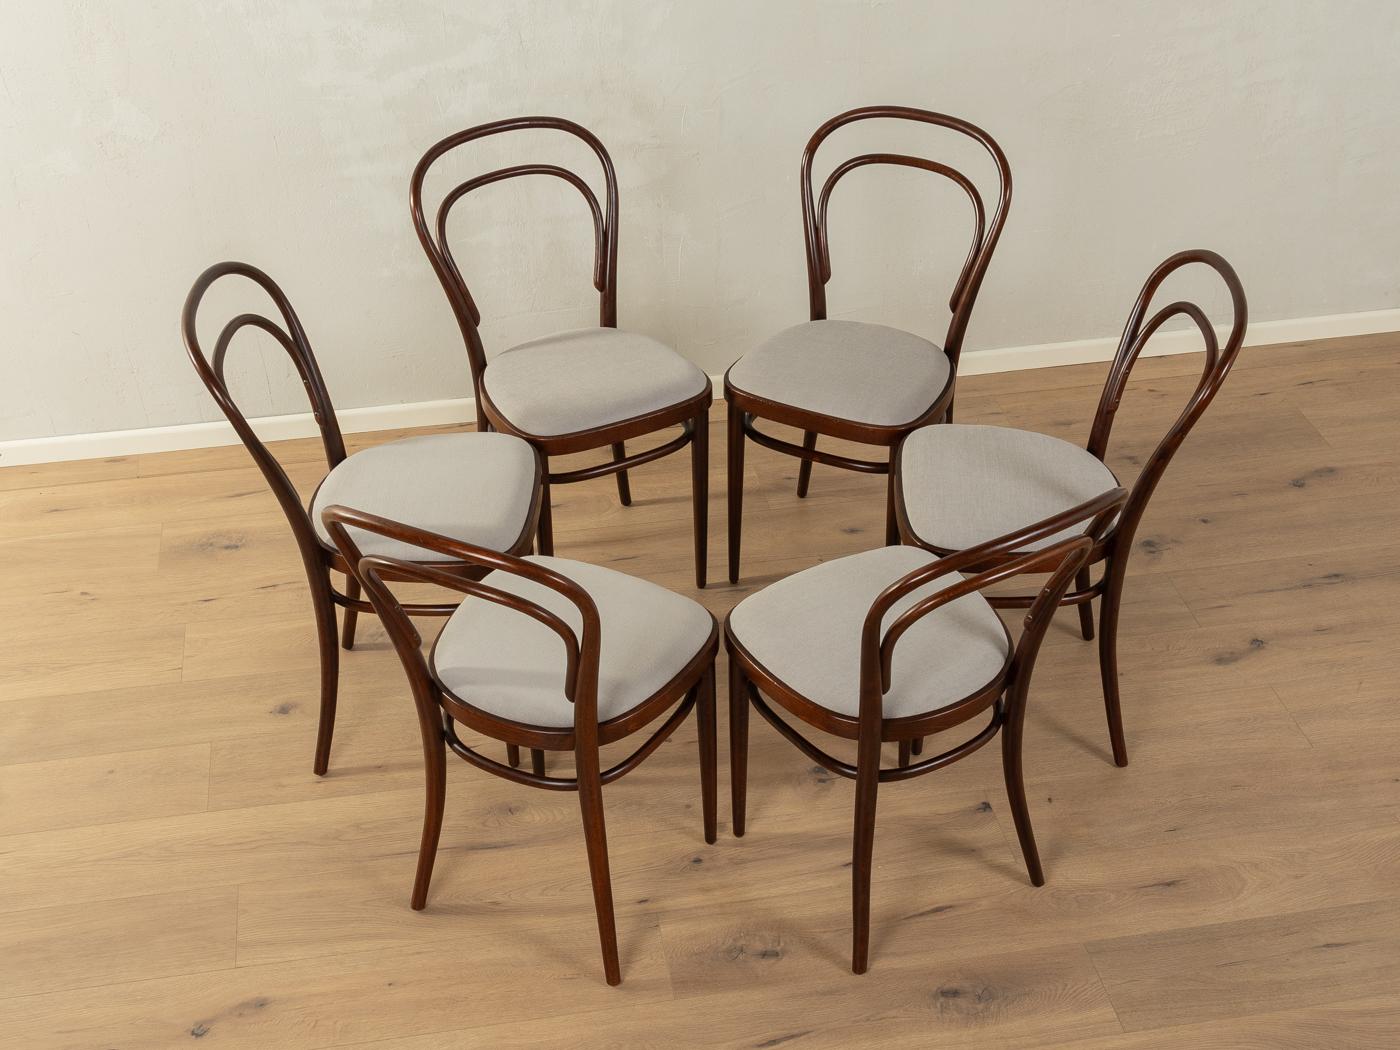 Classic coffee house chair set, model 214, designed by Michael Thonet in the year 1859. The present label from manufacturer Thonet indicates the production series 1922-1938. The chairs have been reupholstered and covered with a high-quality fabric